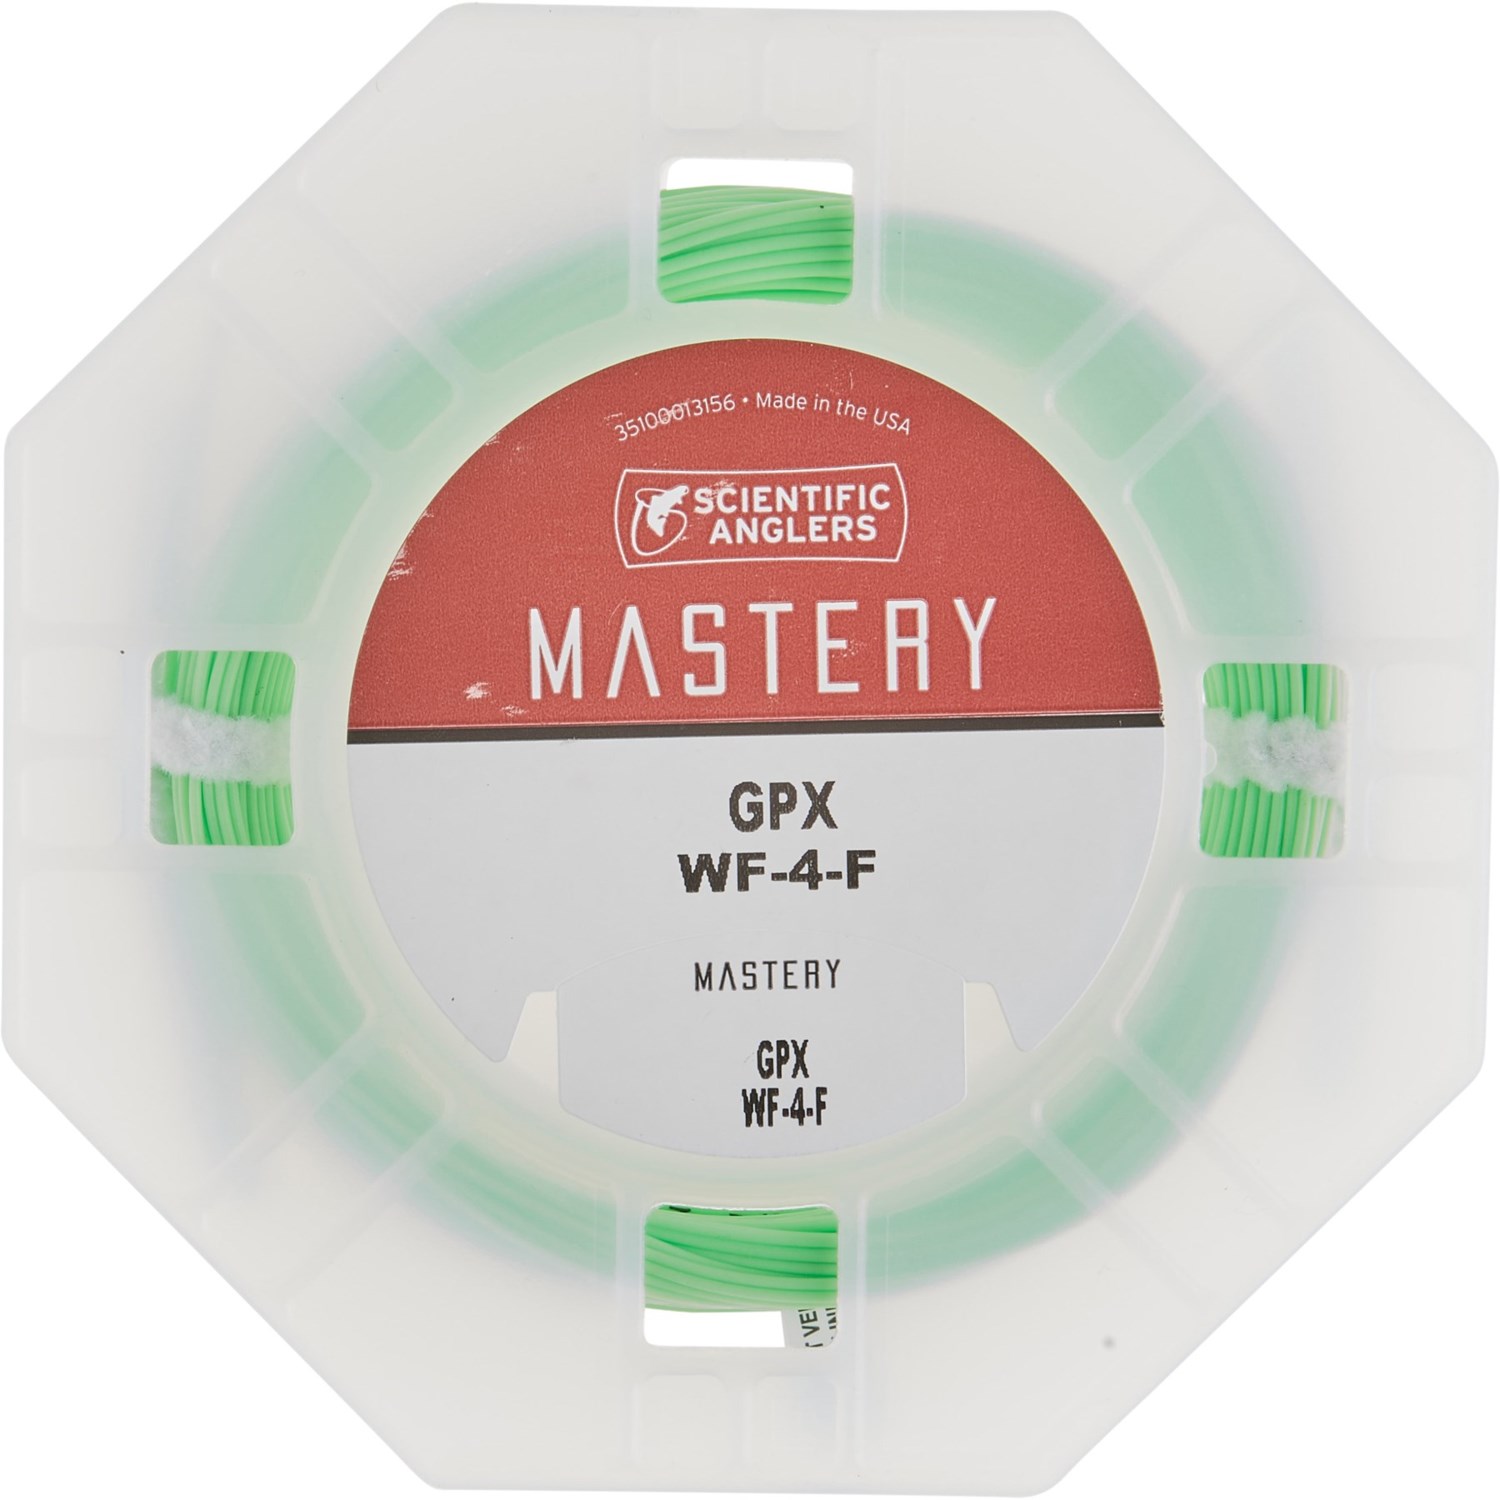 Scientific Anglers Mastery GPX Fly Line - Weight Forward - Save 53%